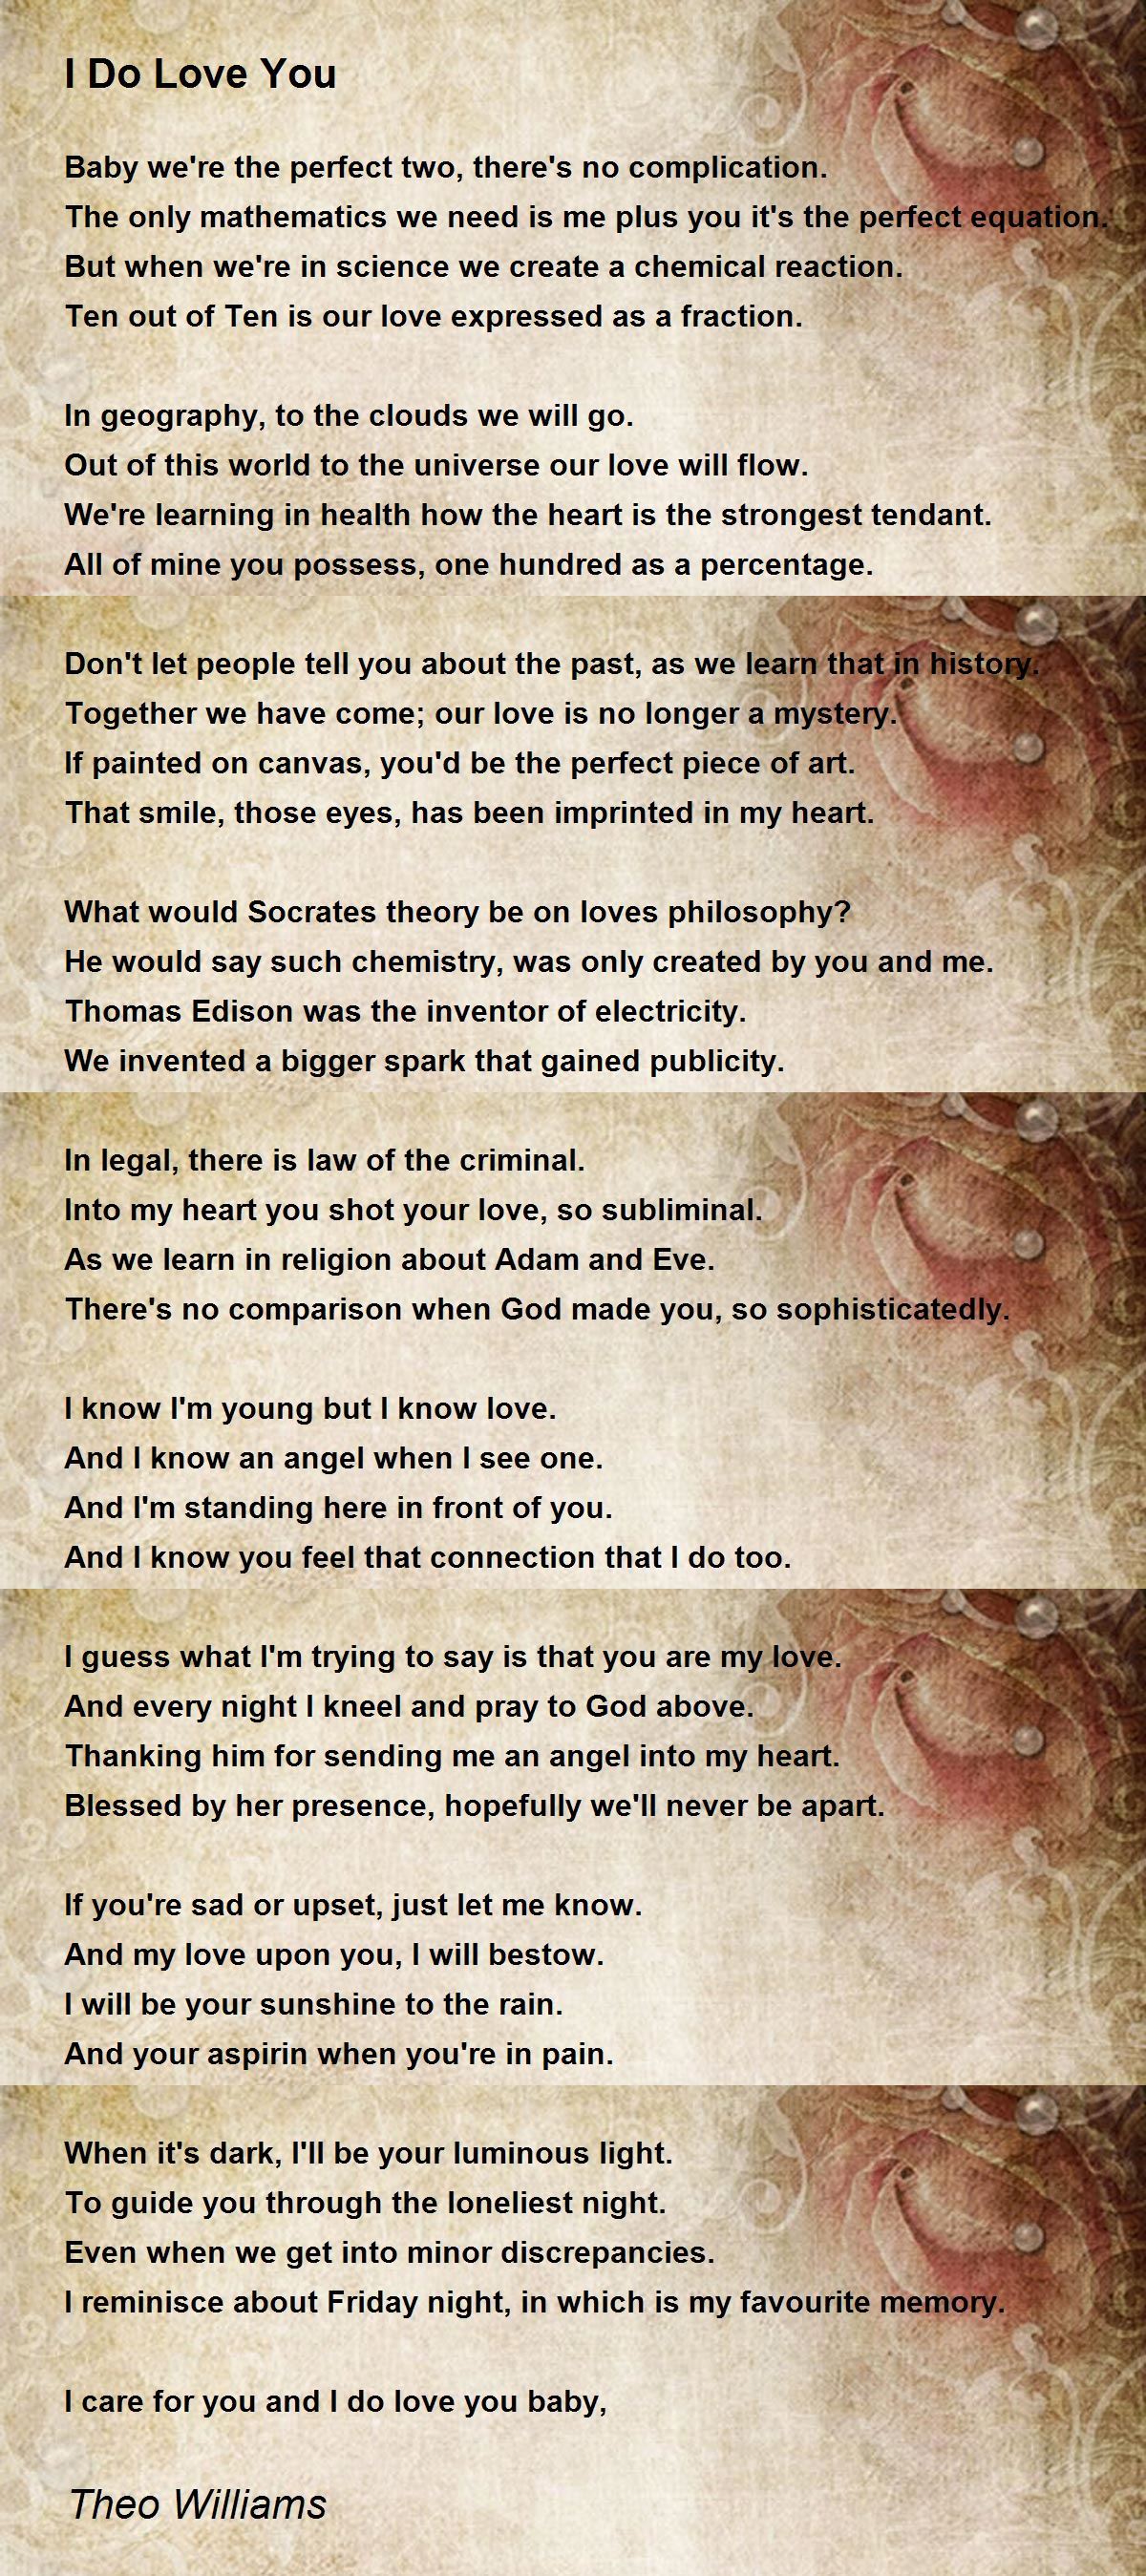 The Pieces Of My Heart - The Pieces Of My Heart Poem by Theo Williams